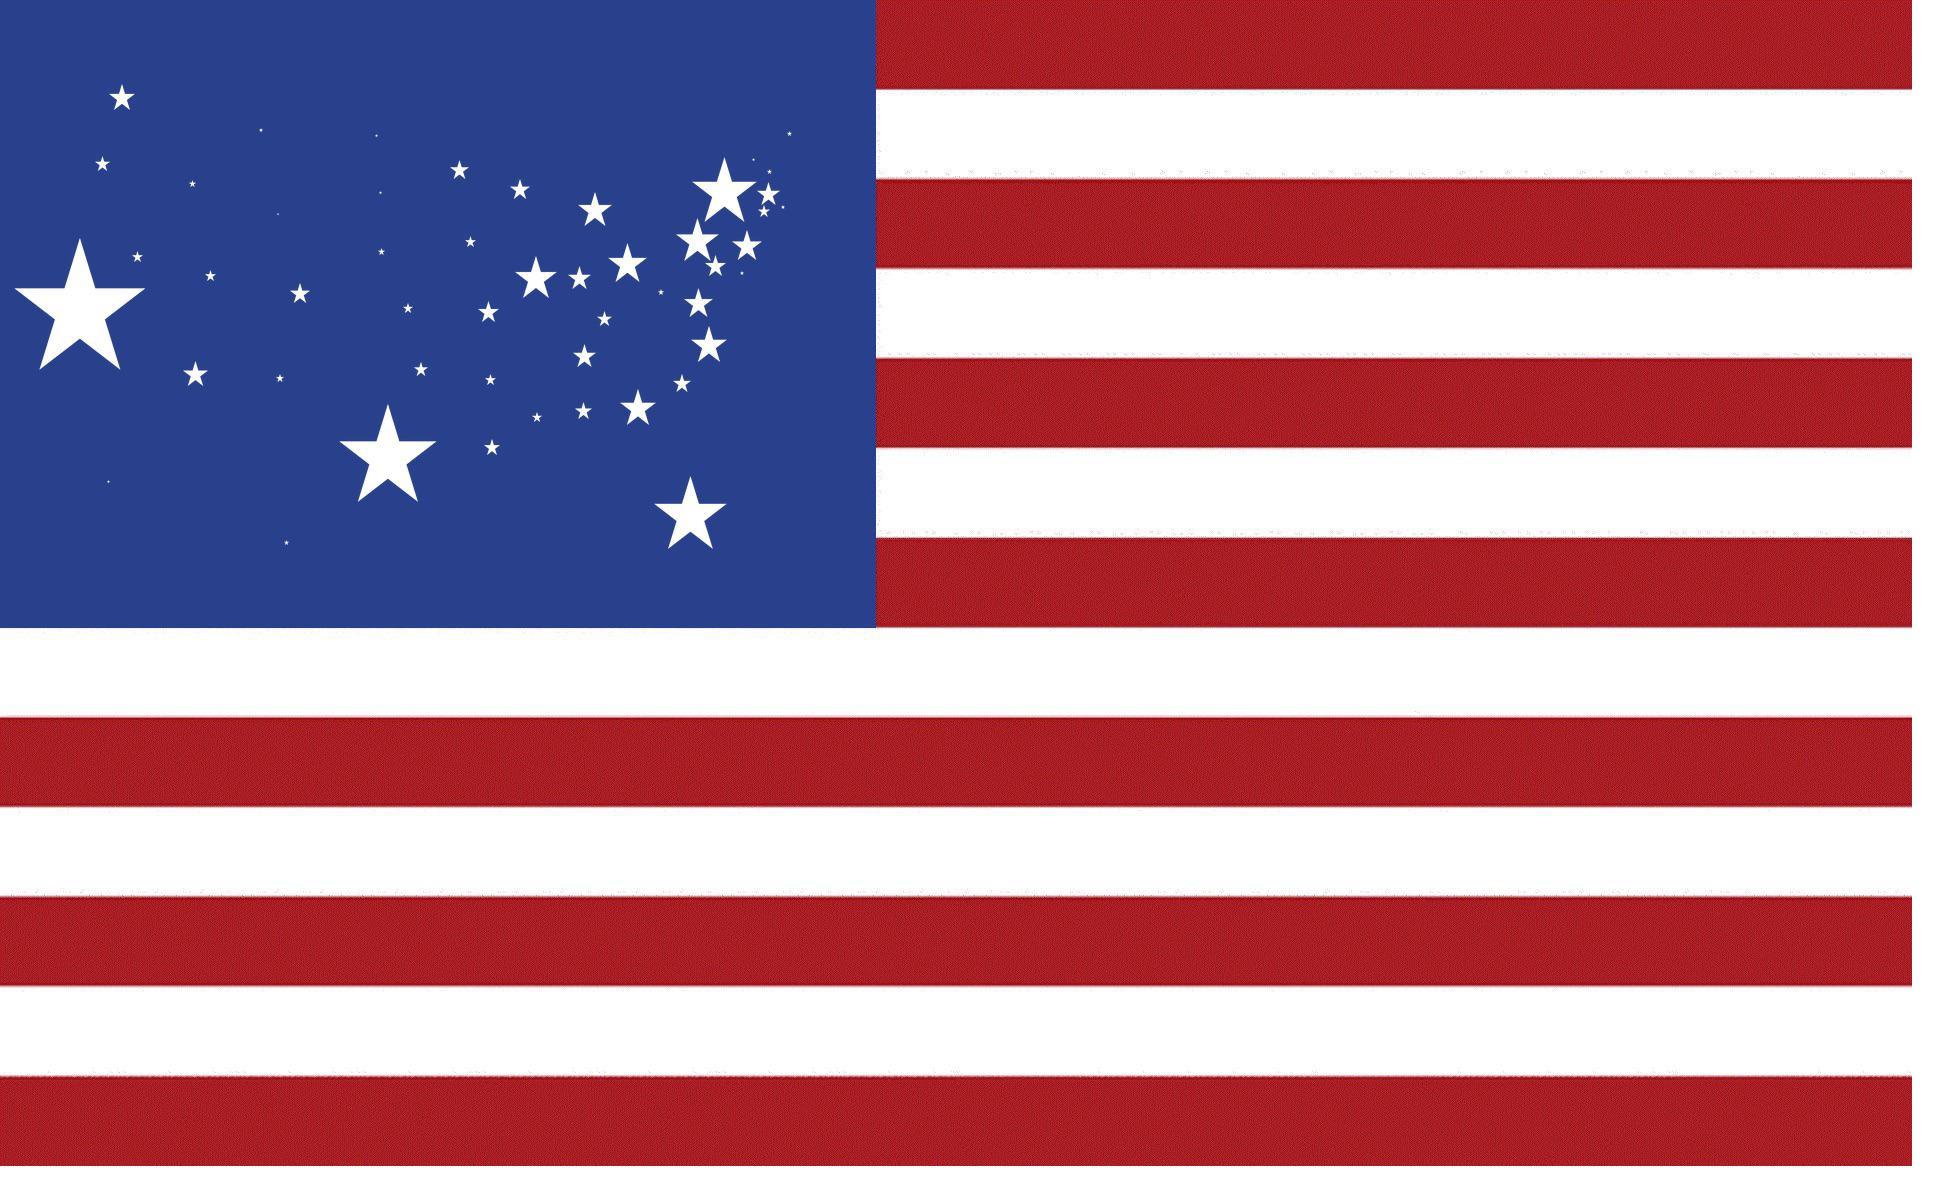 U.S. Flag but each star is scaled proportionally to their state’s